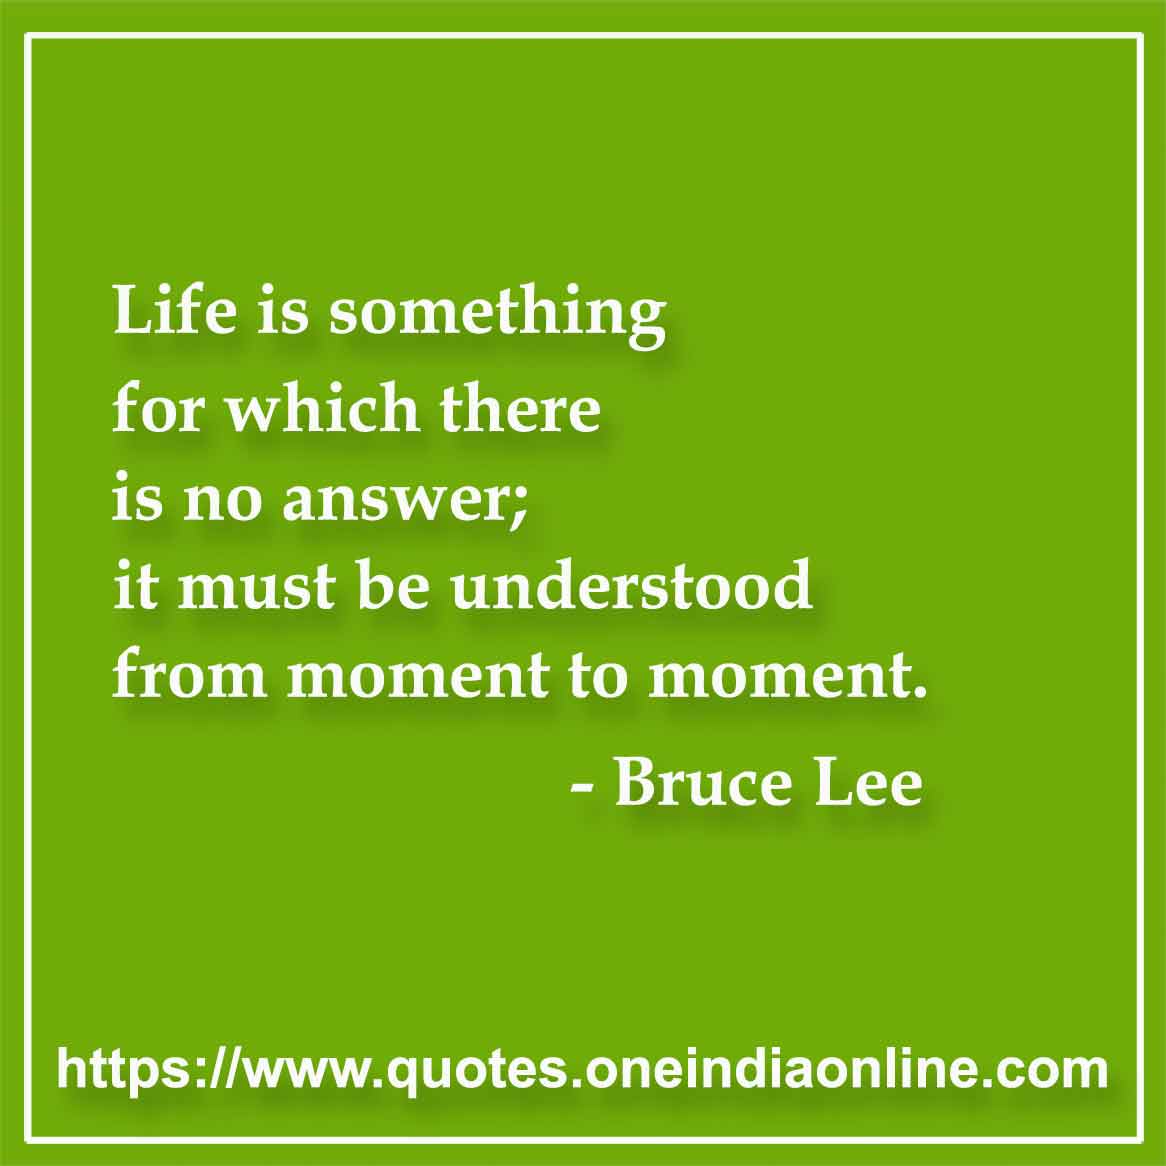 Life is something for which there is no answer; it must be understood from moment to moment.